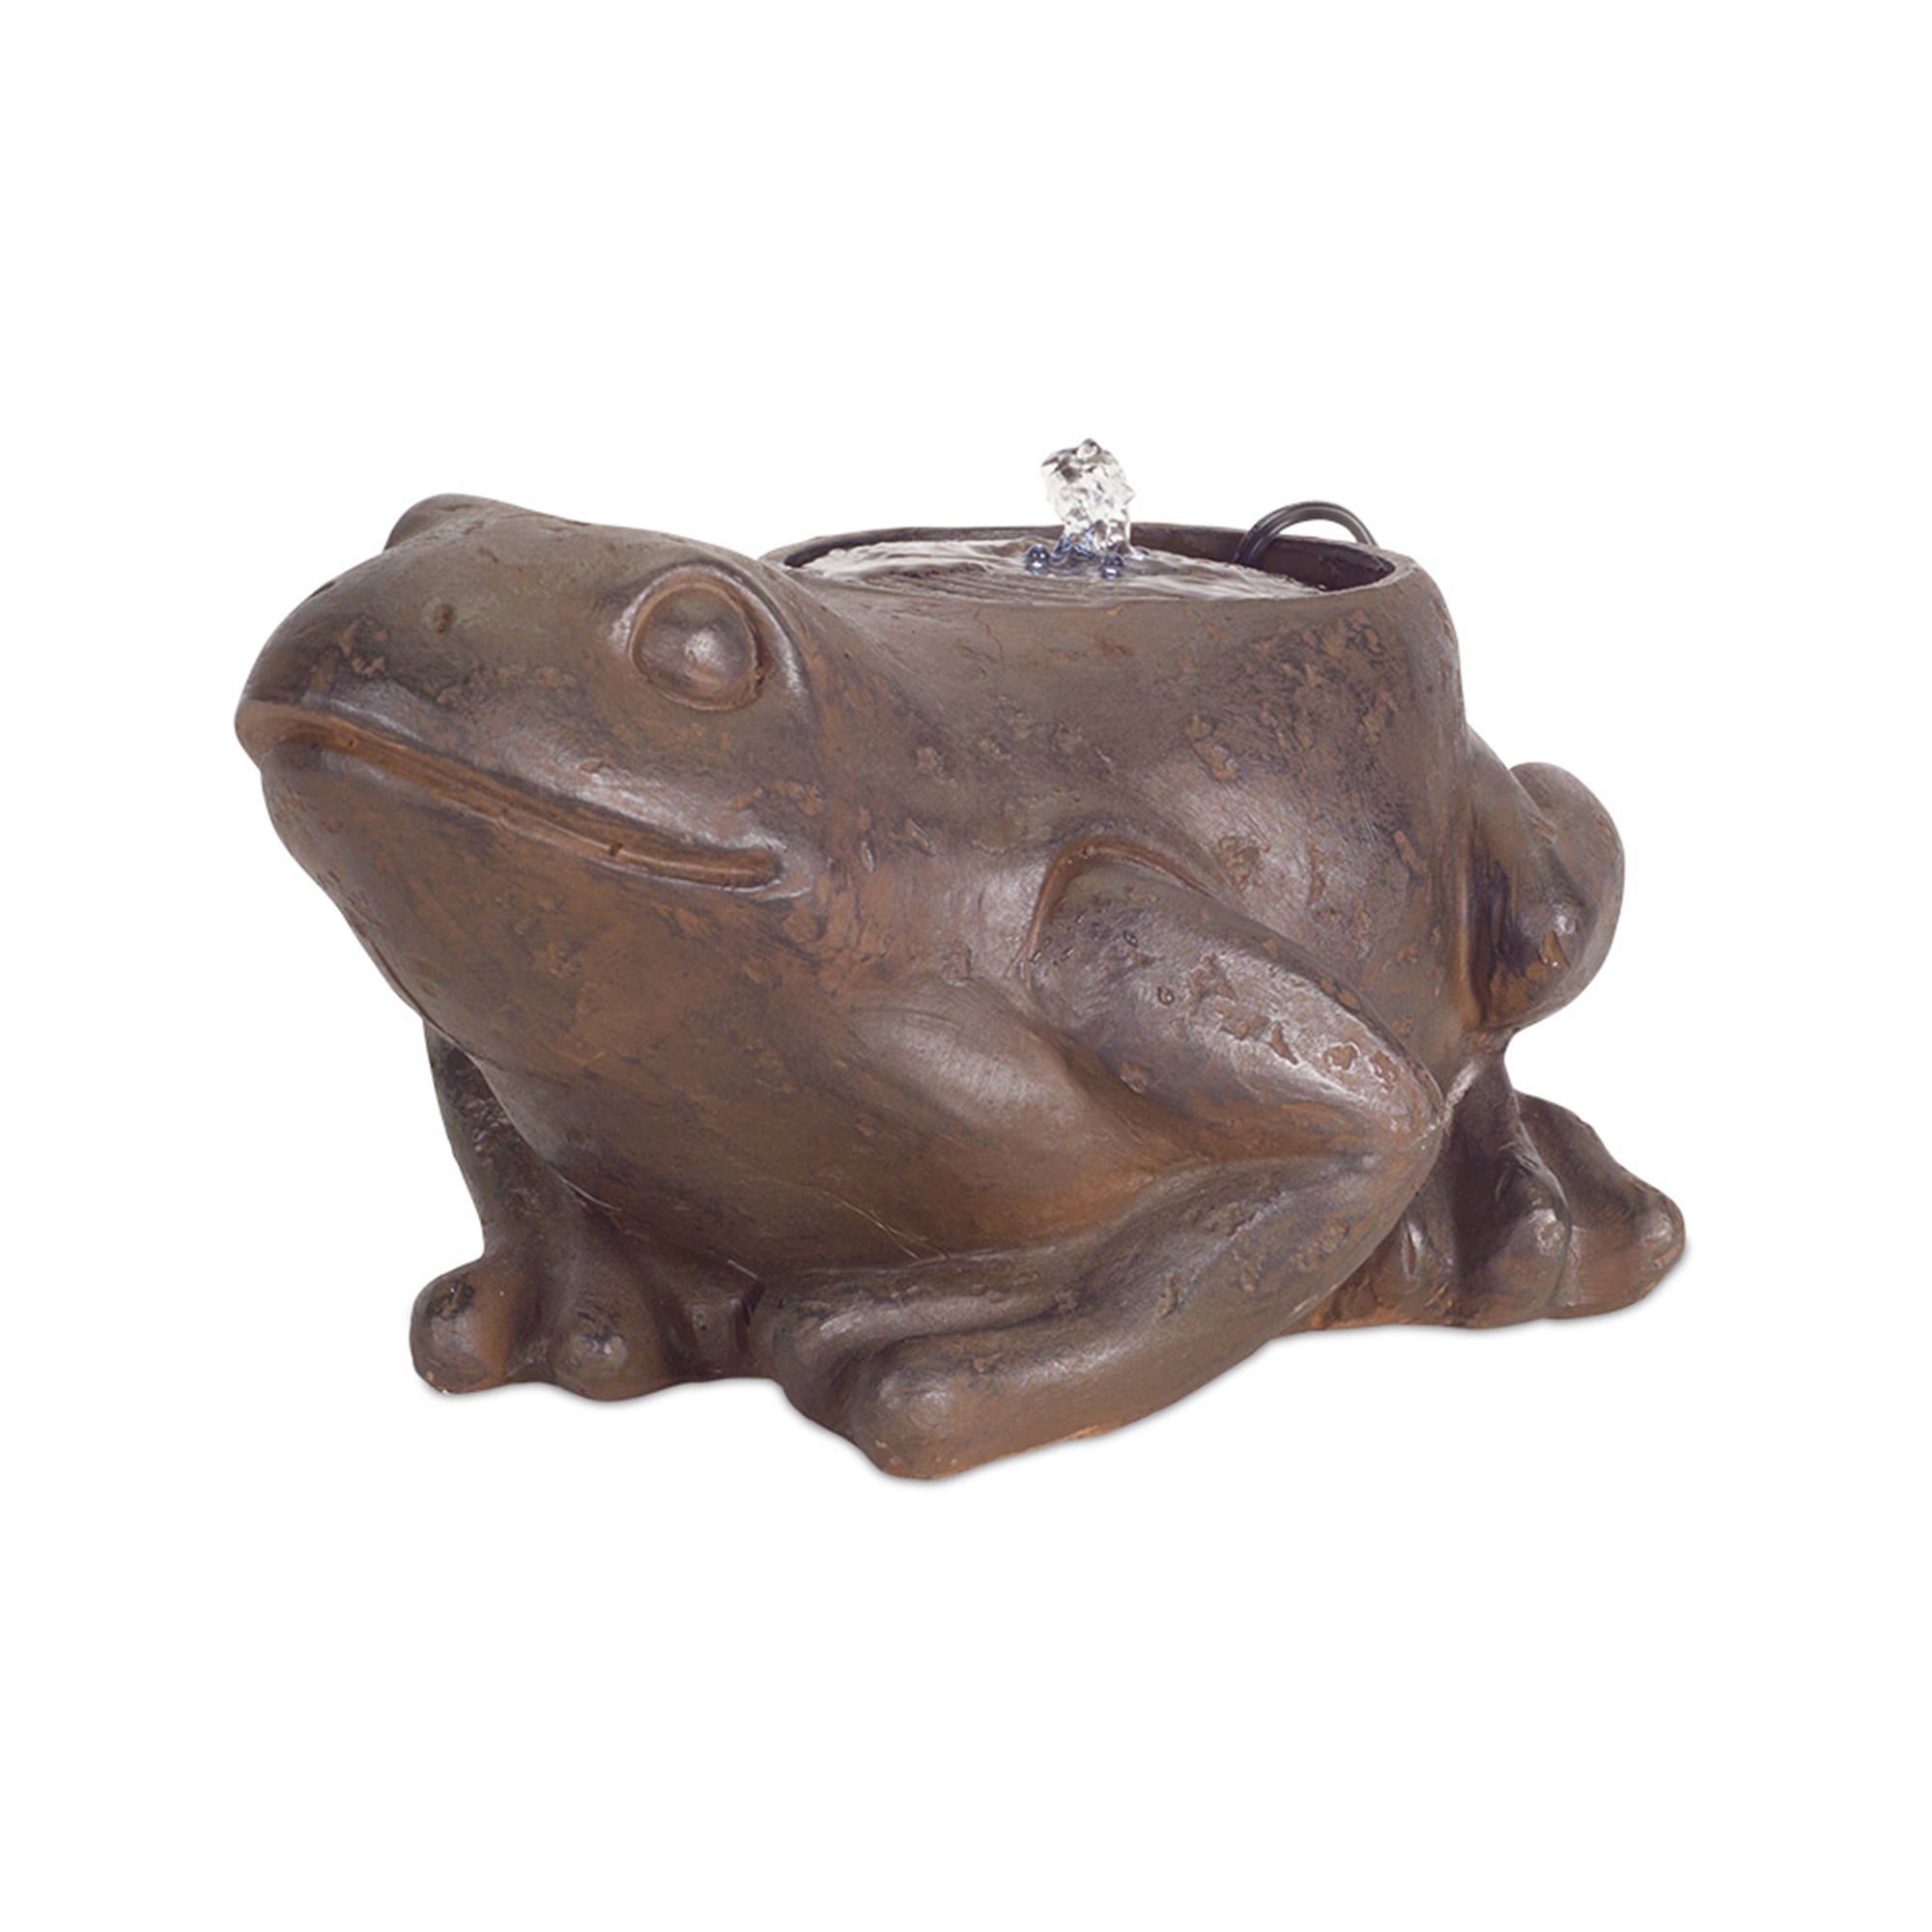 Frog Fountain 10" x 7"H Resin